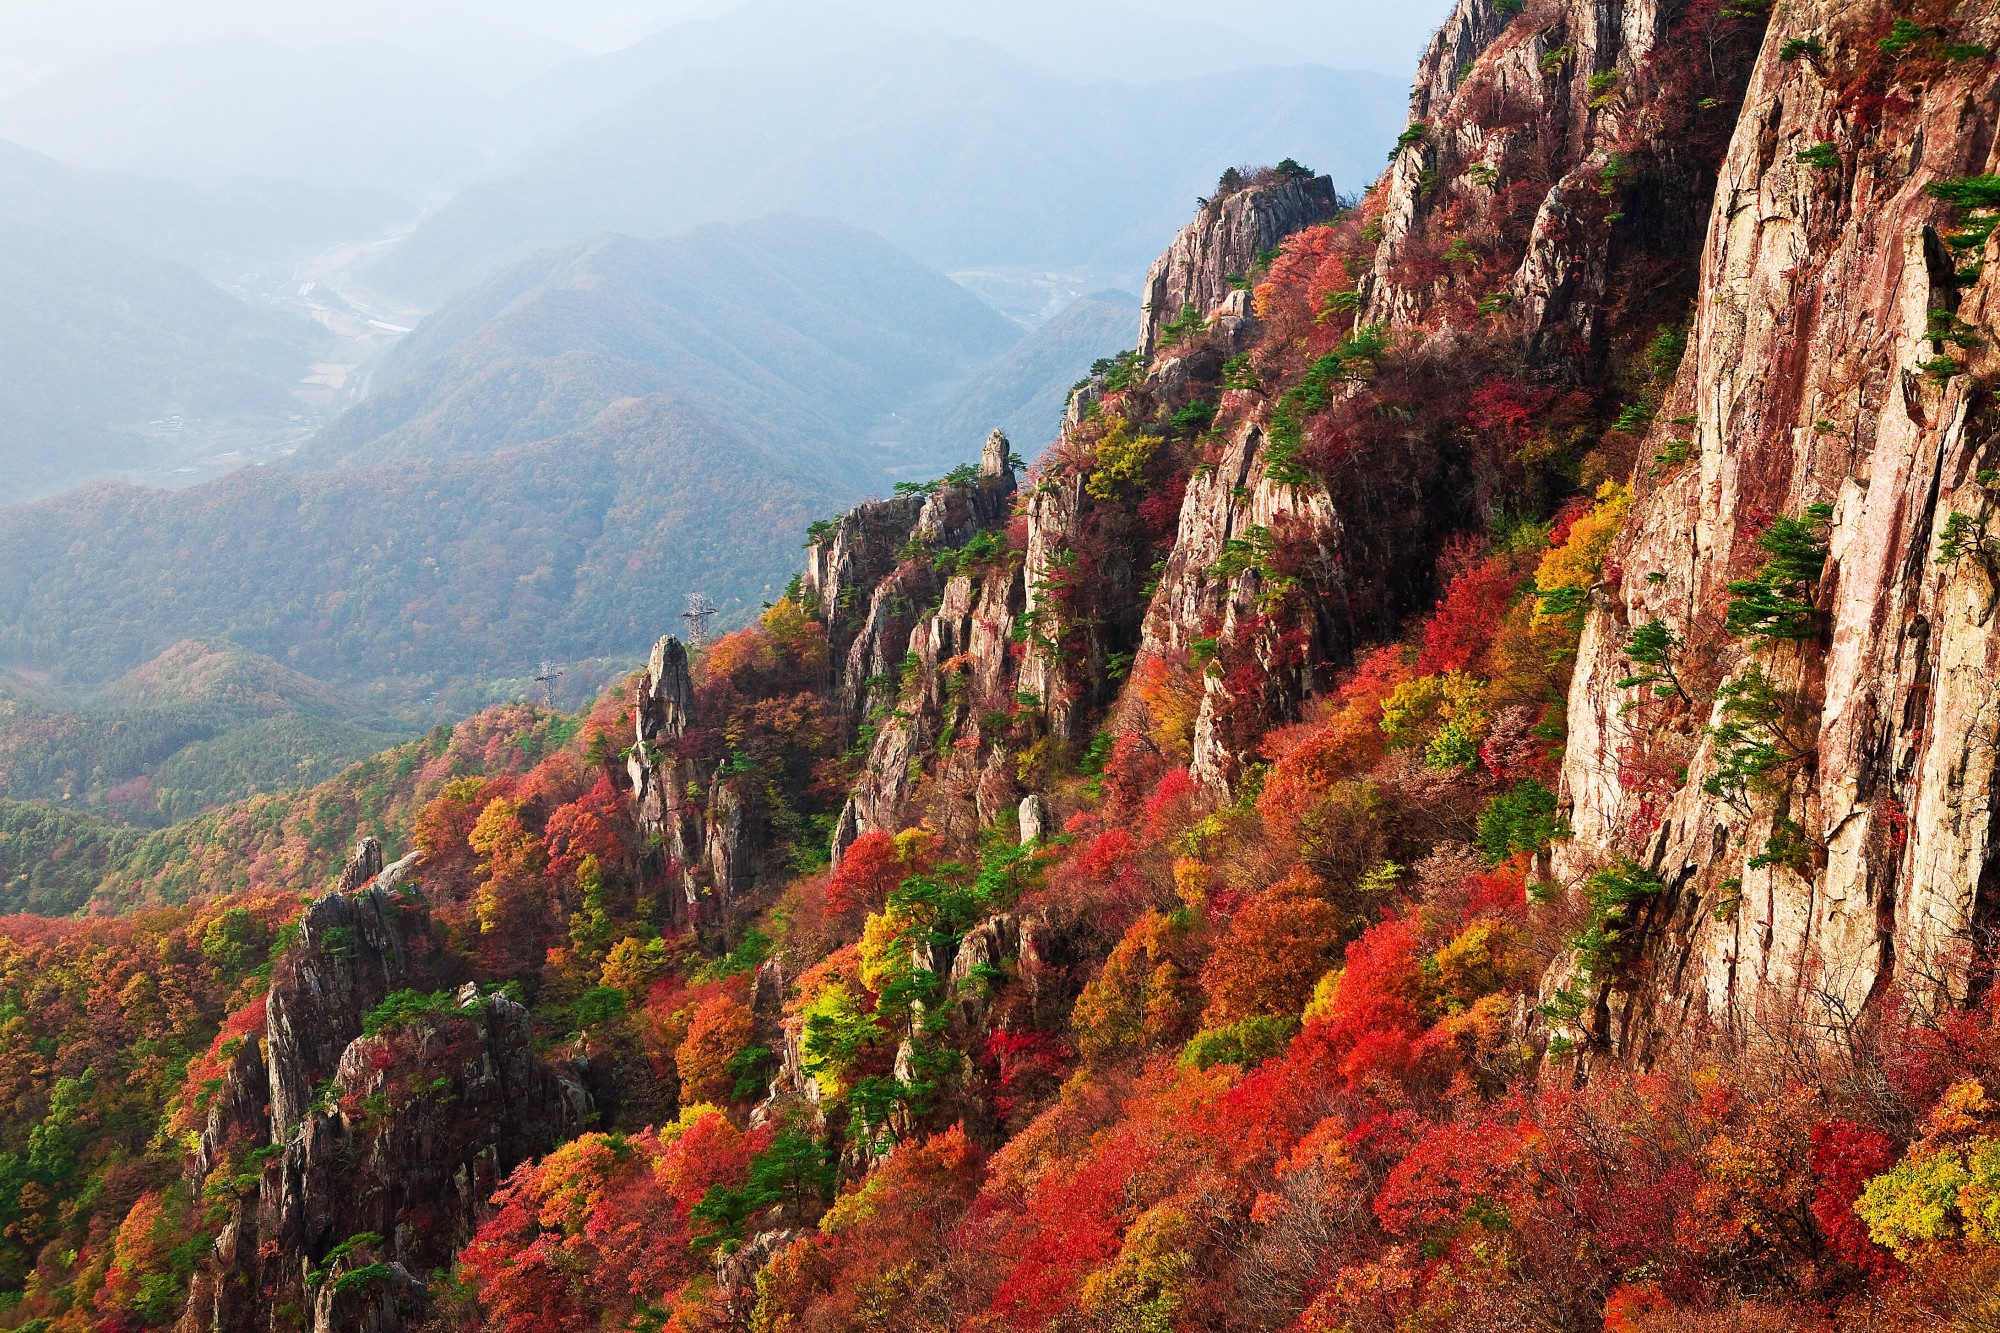 Falling for Foliage: 9 Amazing Destinations to See Autumn Scenery in the US